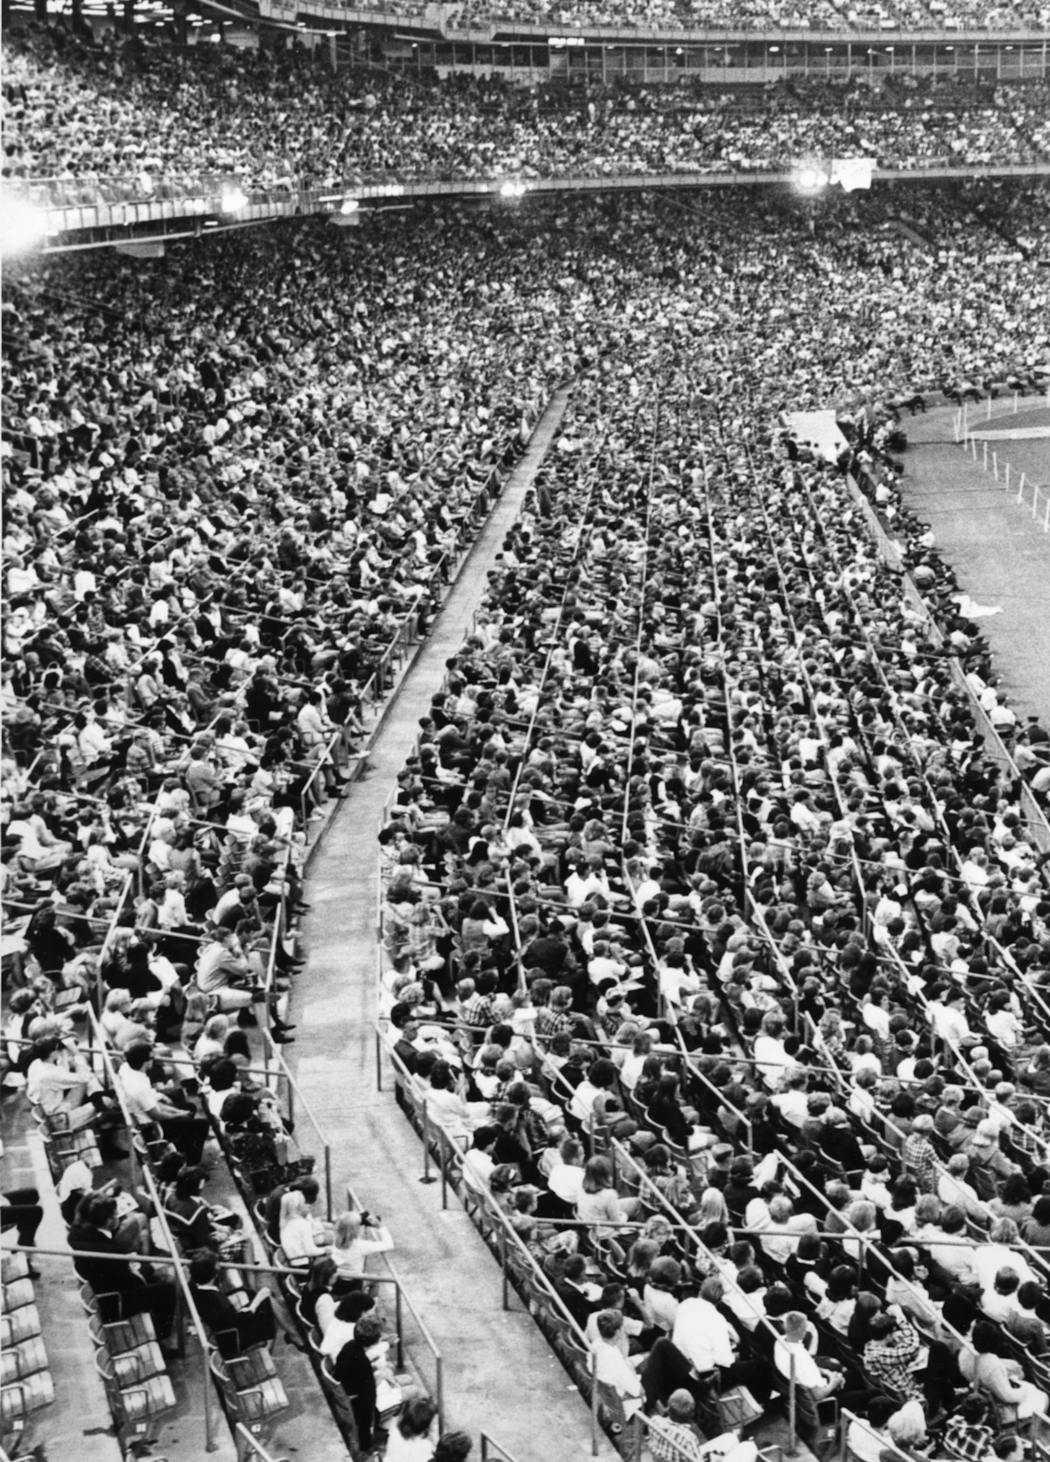 Fans crowded into Metropolitan Stadium to see the Beatles in 1965.